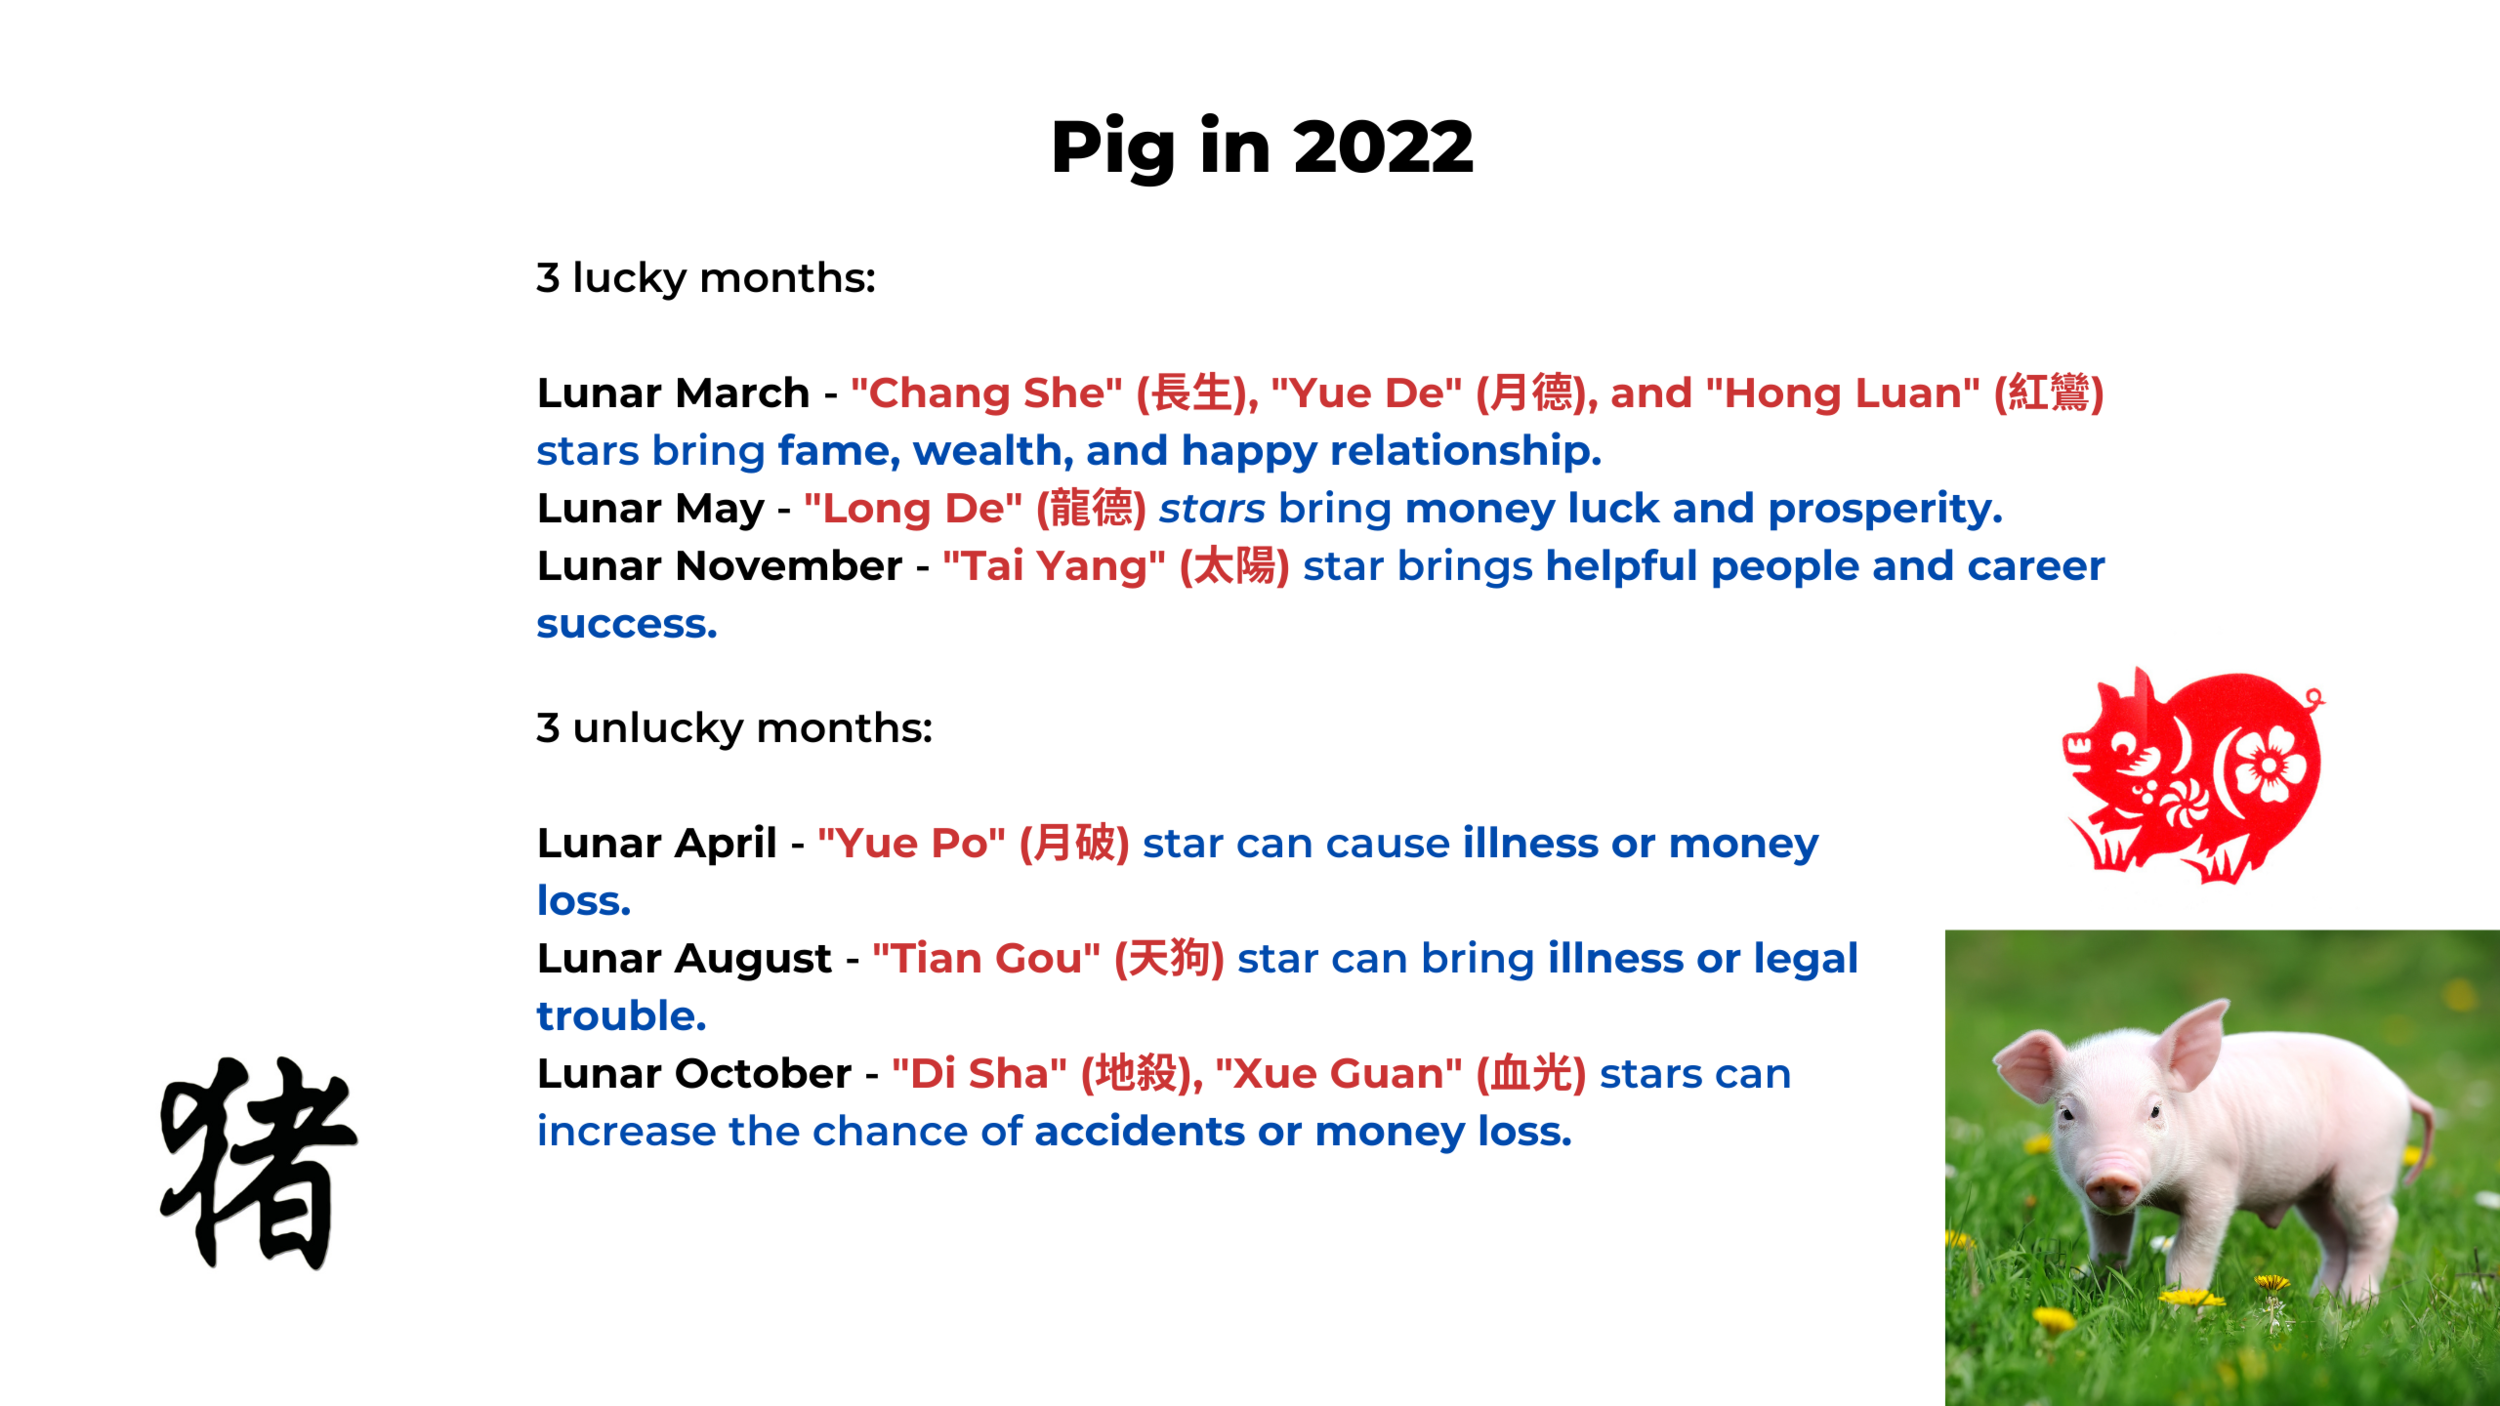 2022 year of the chinese zodiac